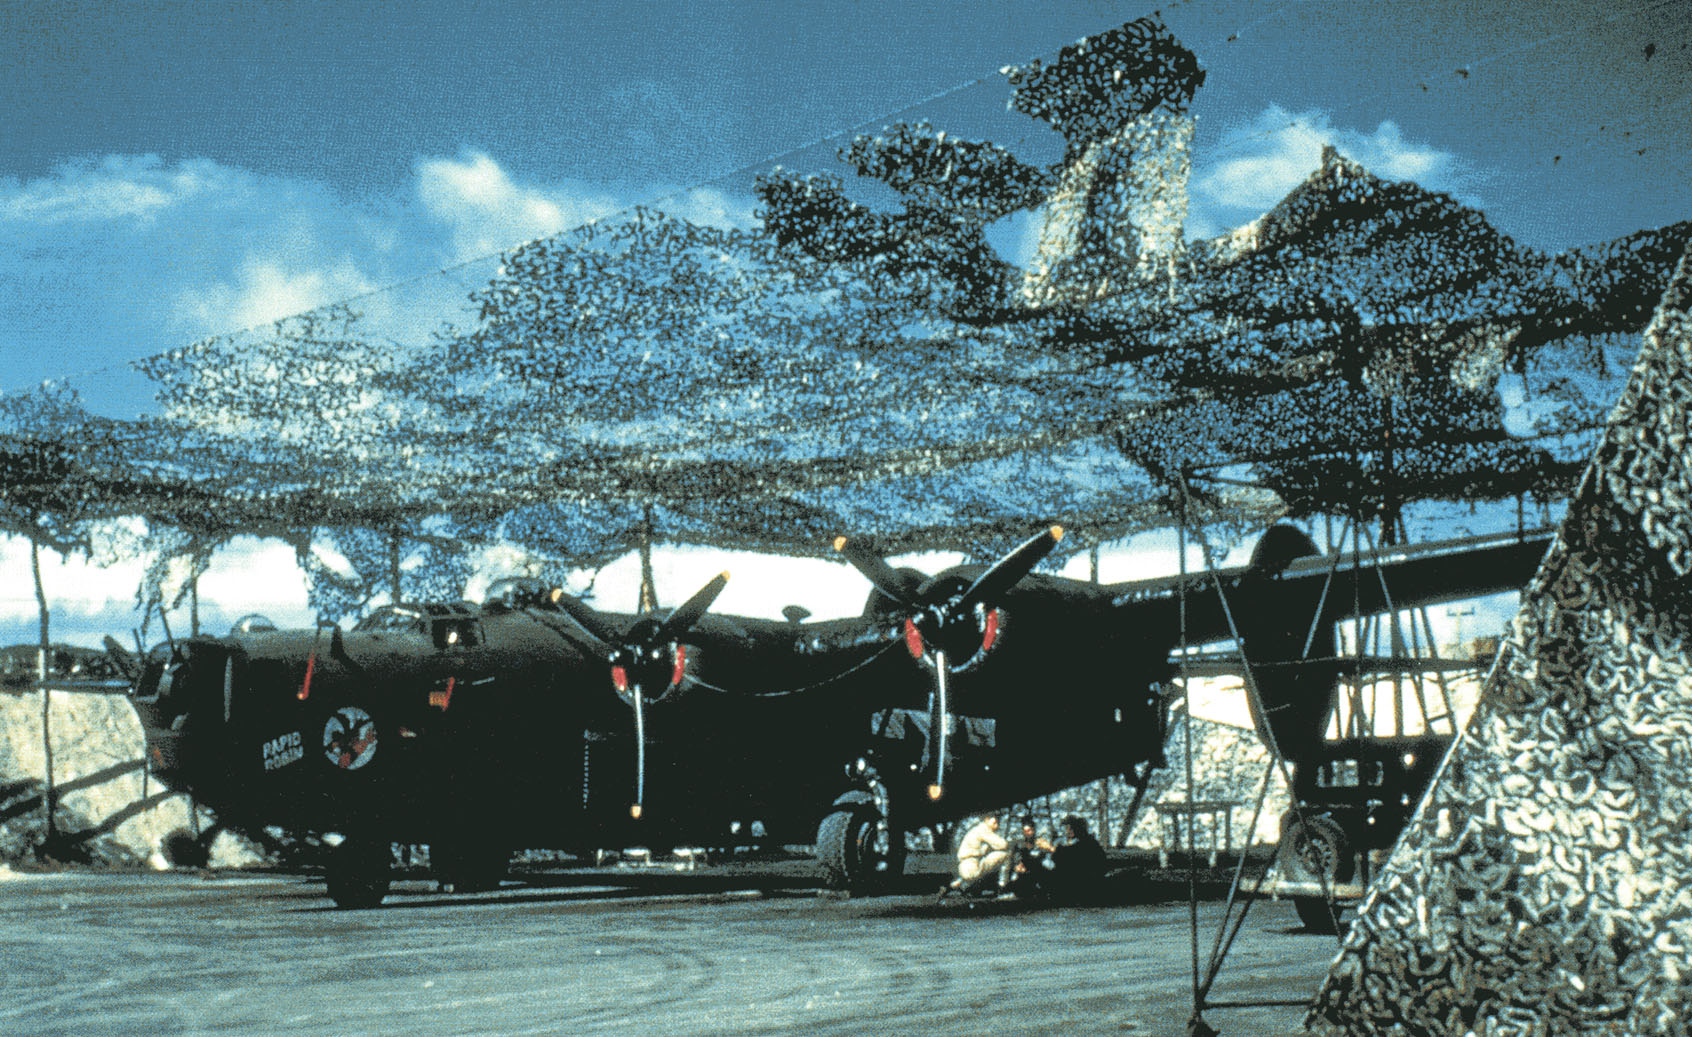 B-24 Liberator 'Rapid Robin' of the 431st Bomb Squadron parked under camouflage netting at Bellows Field, Oahu, US Territory of Hawaii, Aug or Sep 1943